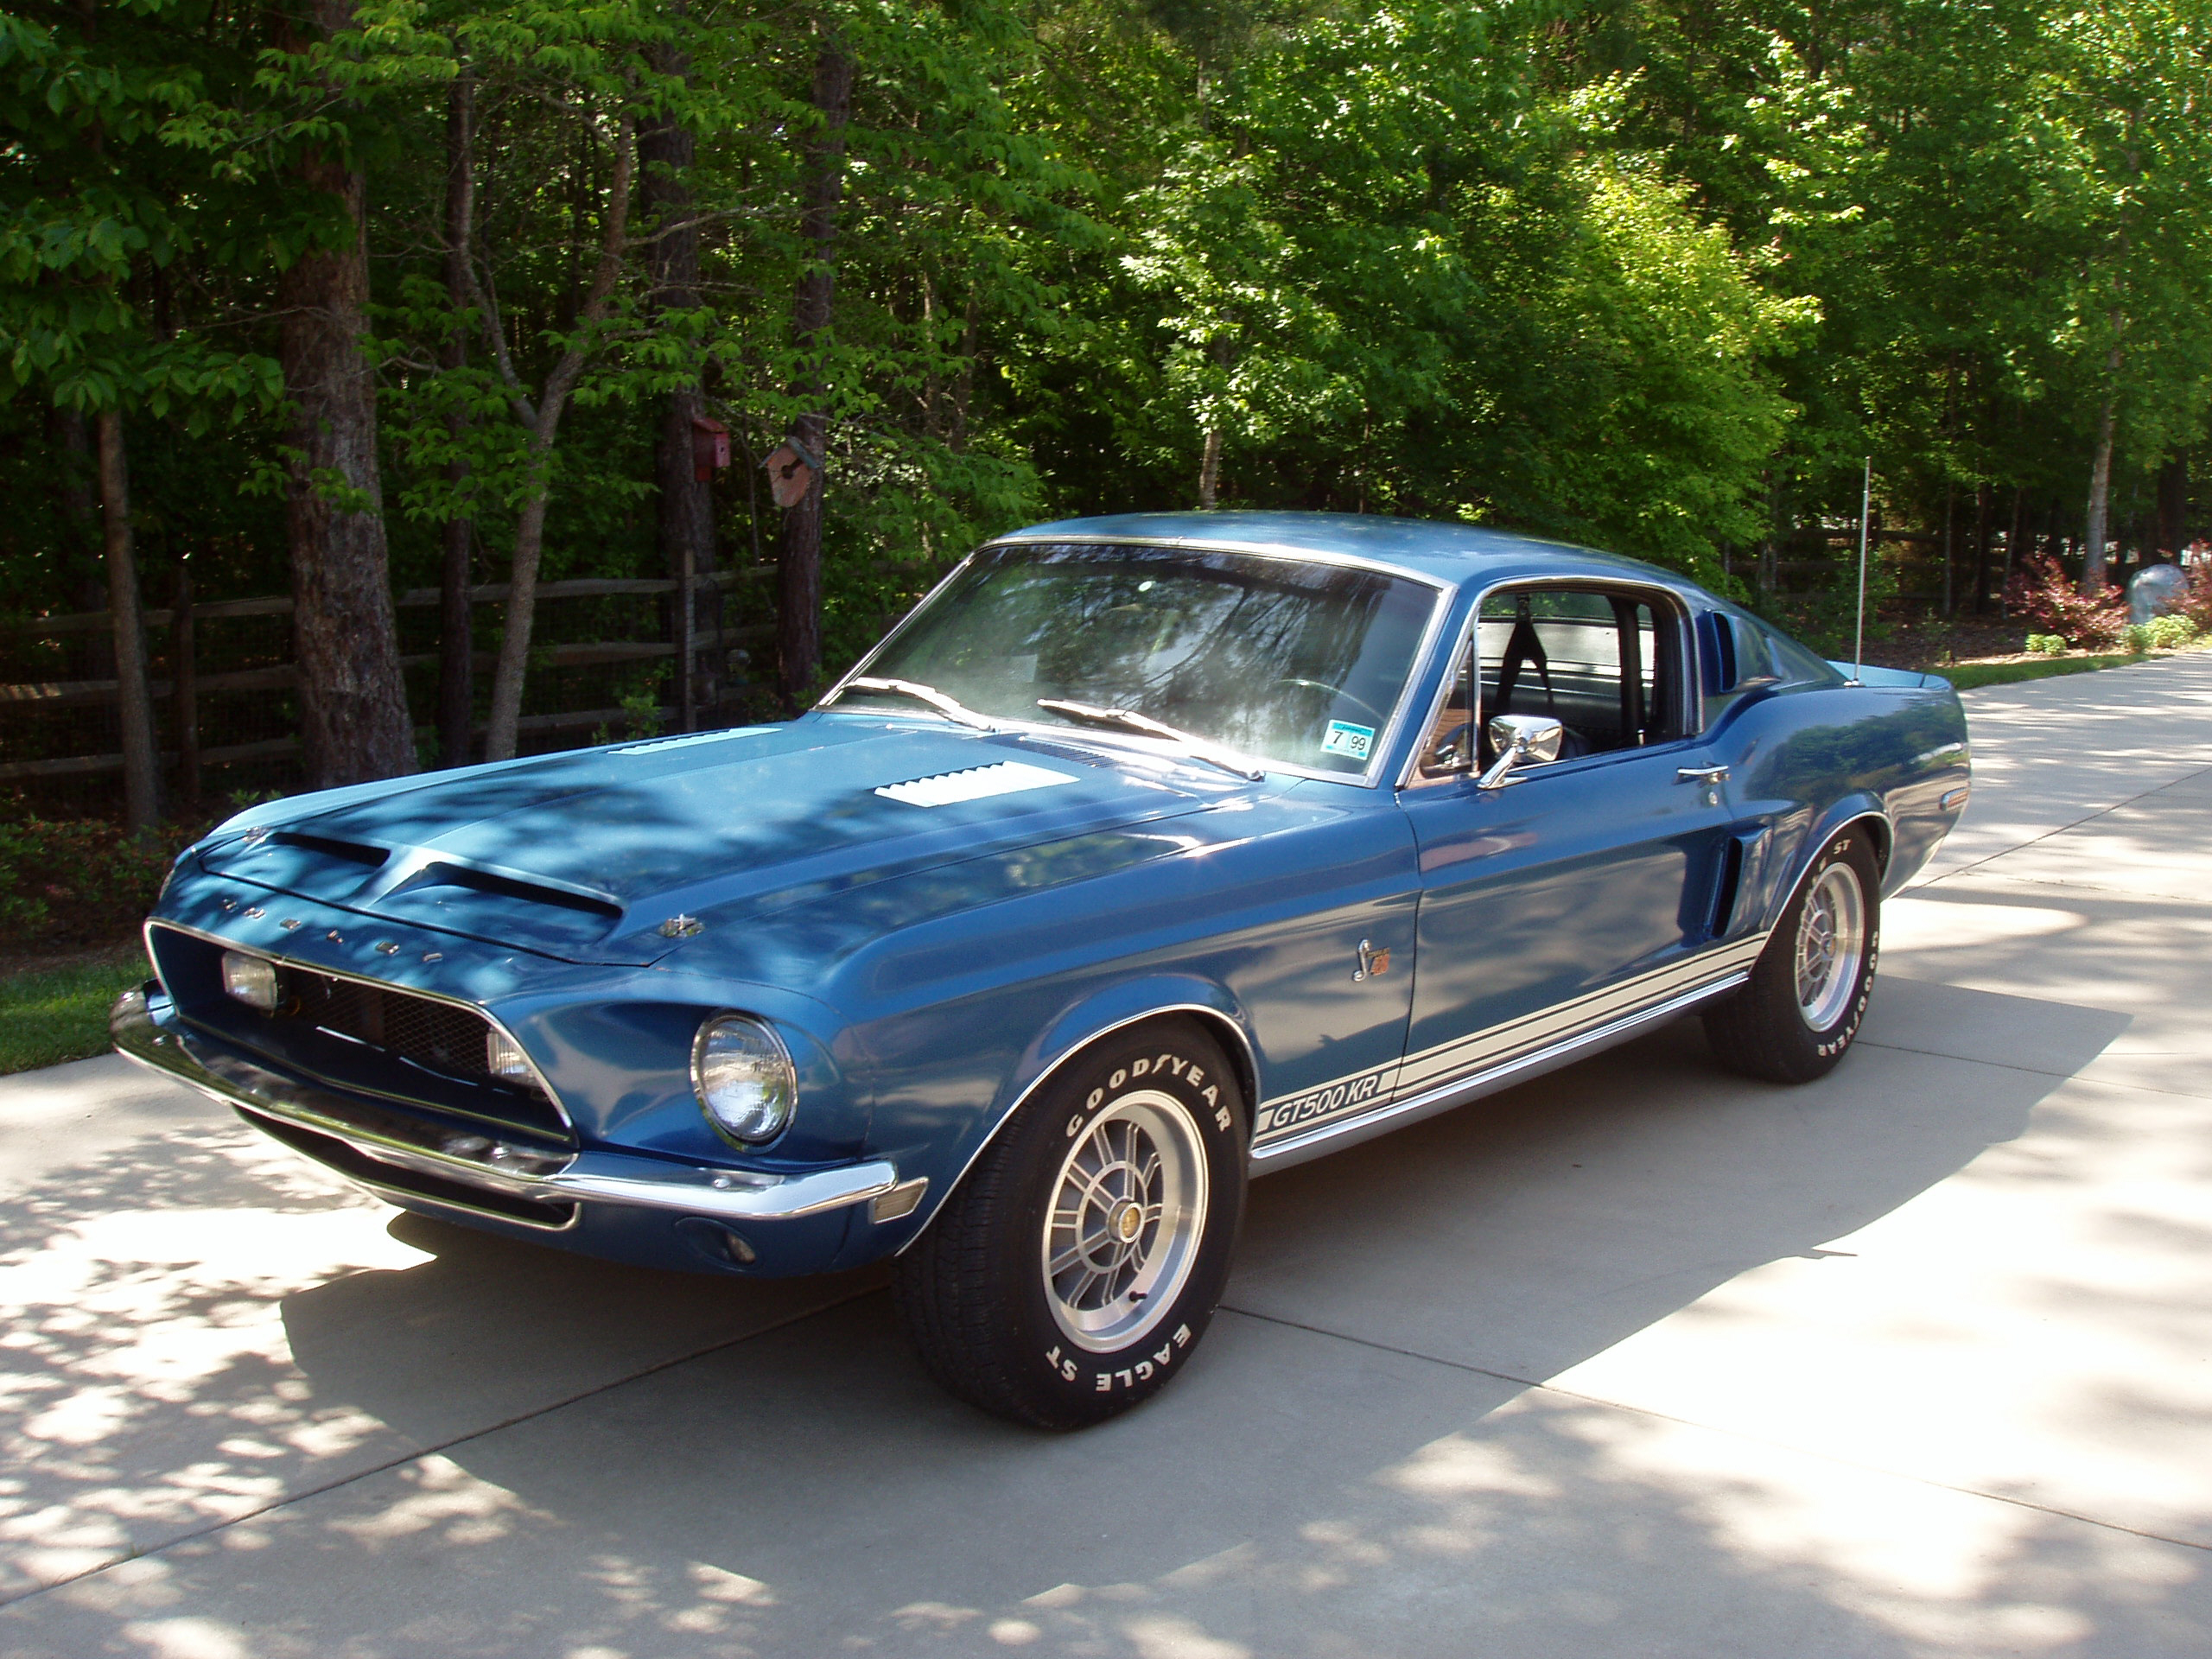 1968 Mustang Shelby GT500 KR by TheCarloos on DeviantArt